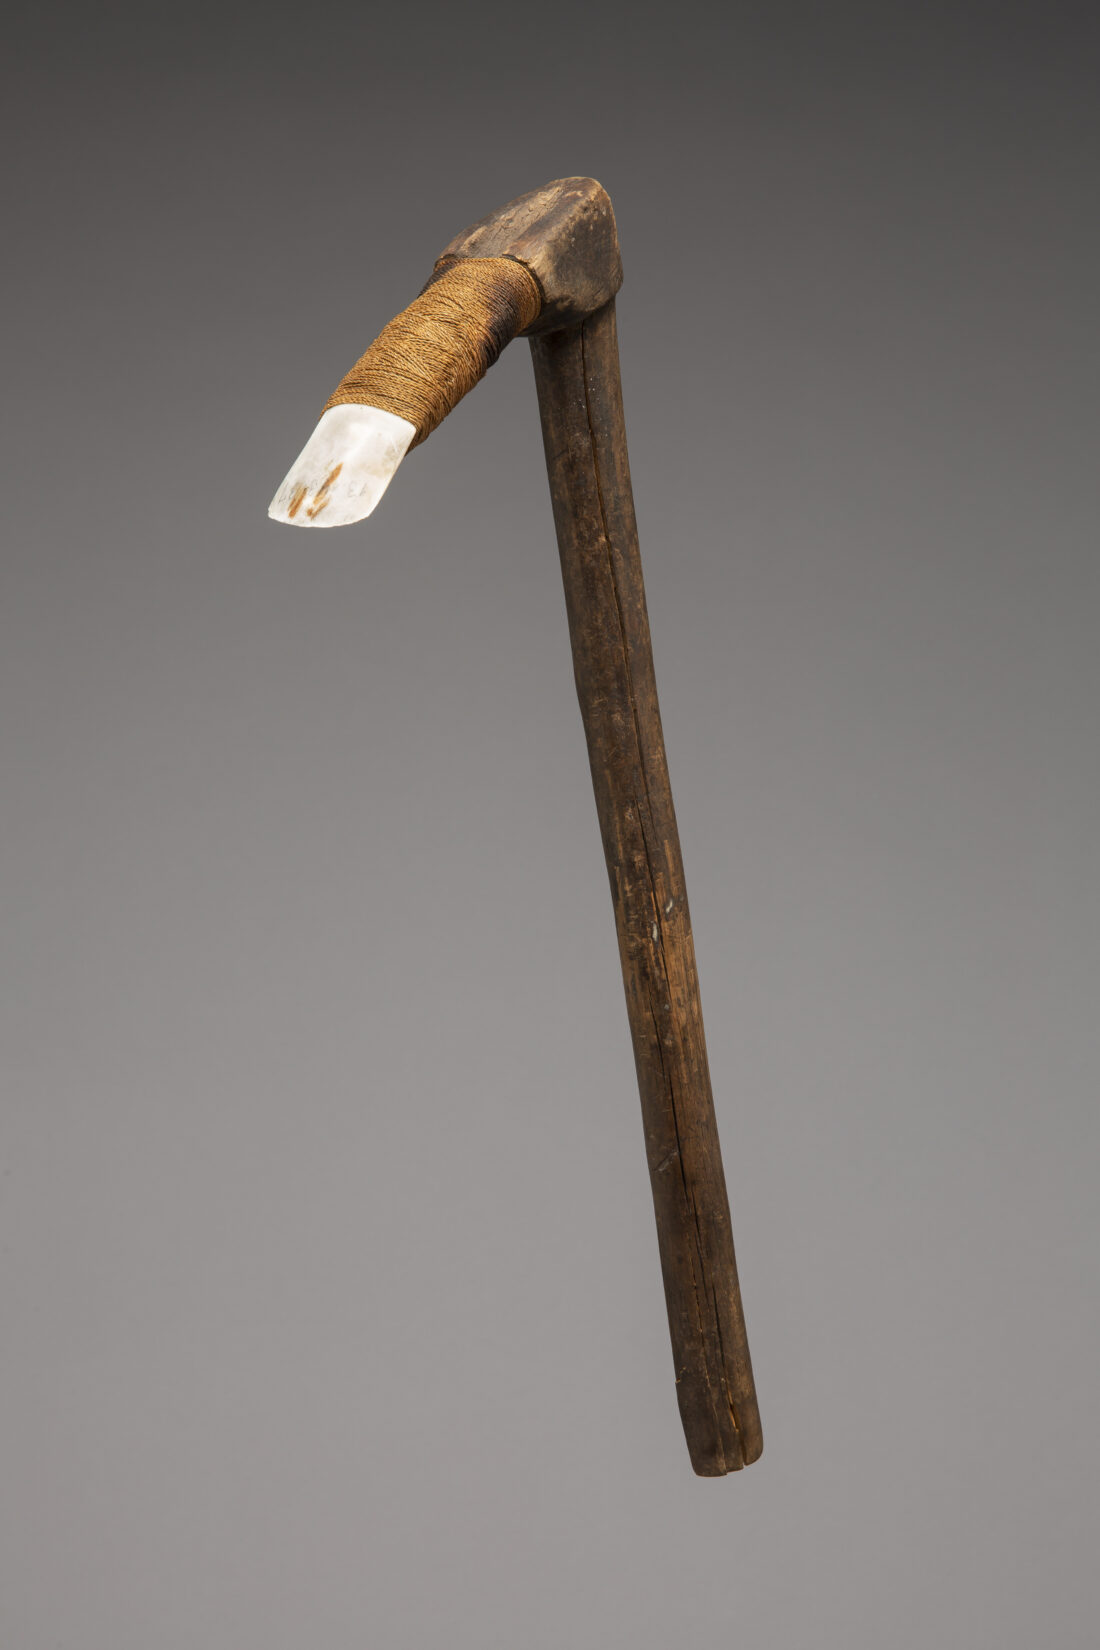 Axe, Marshall Islands, before 1913, Pacific Ocean